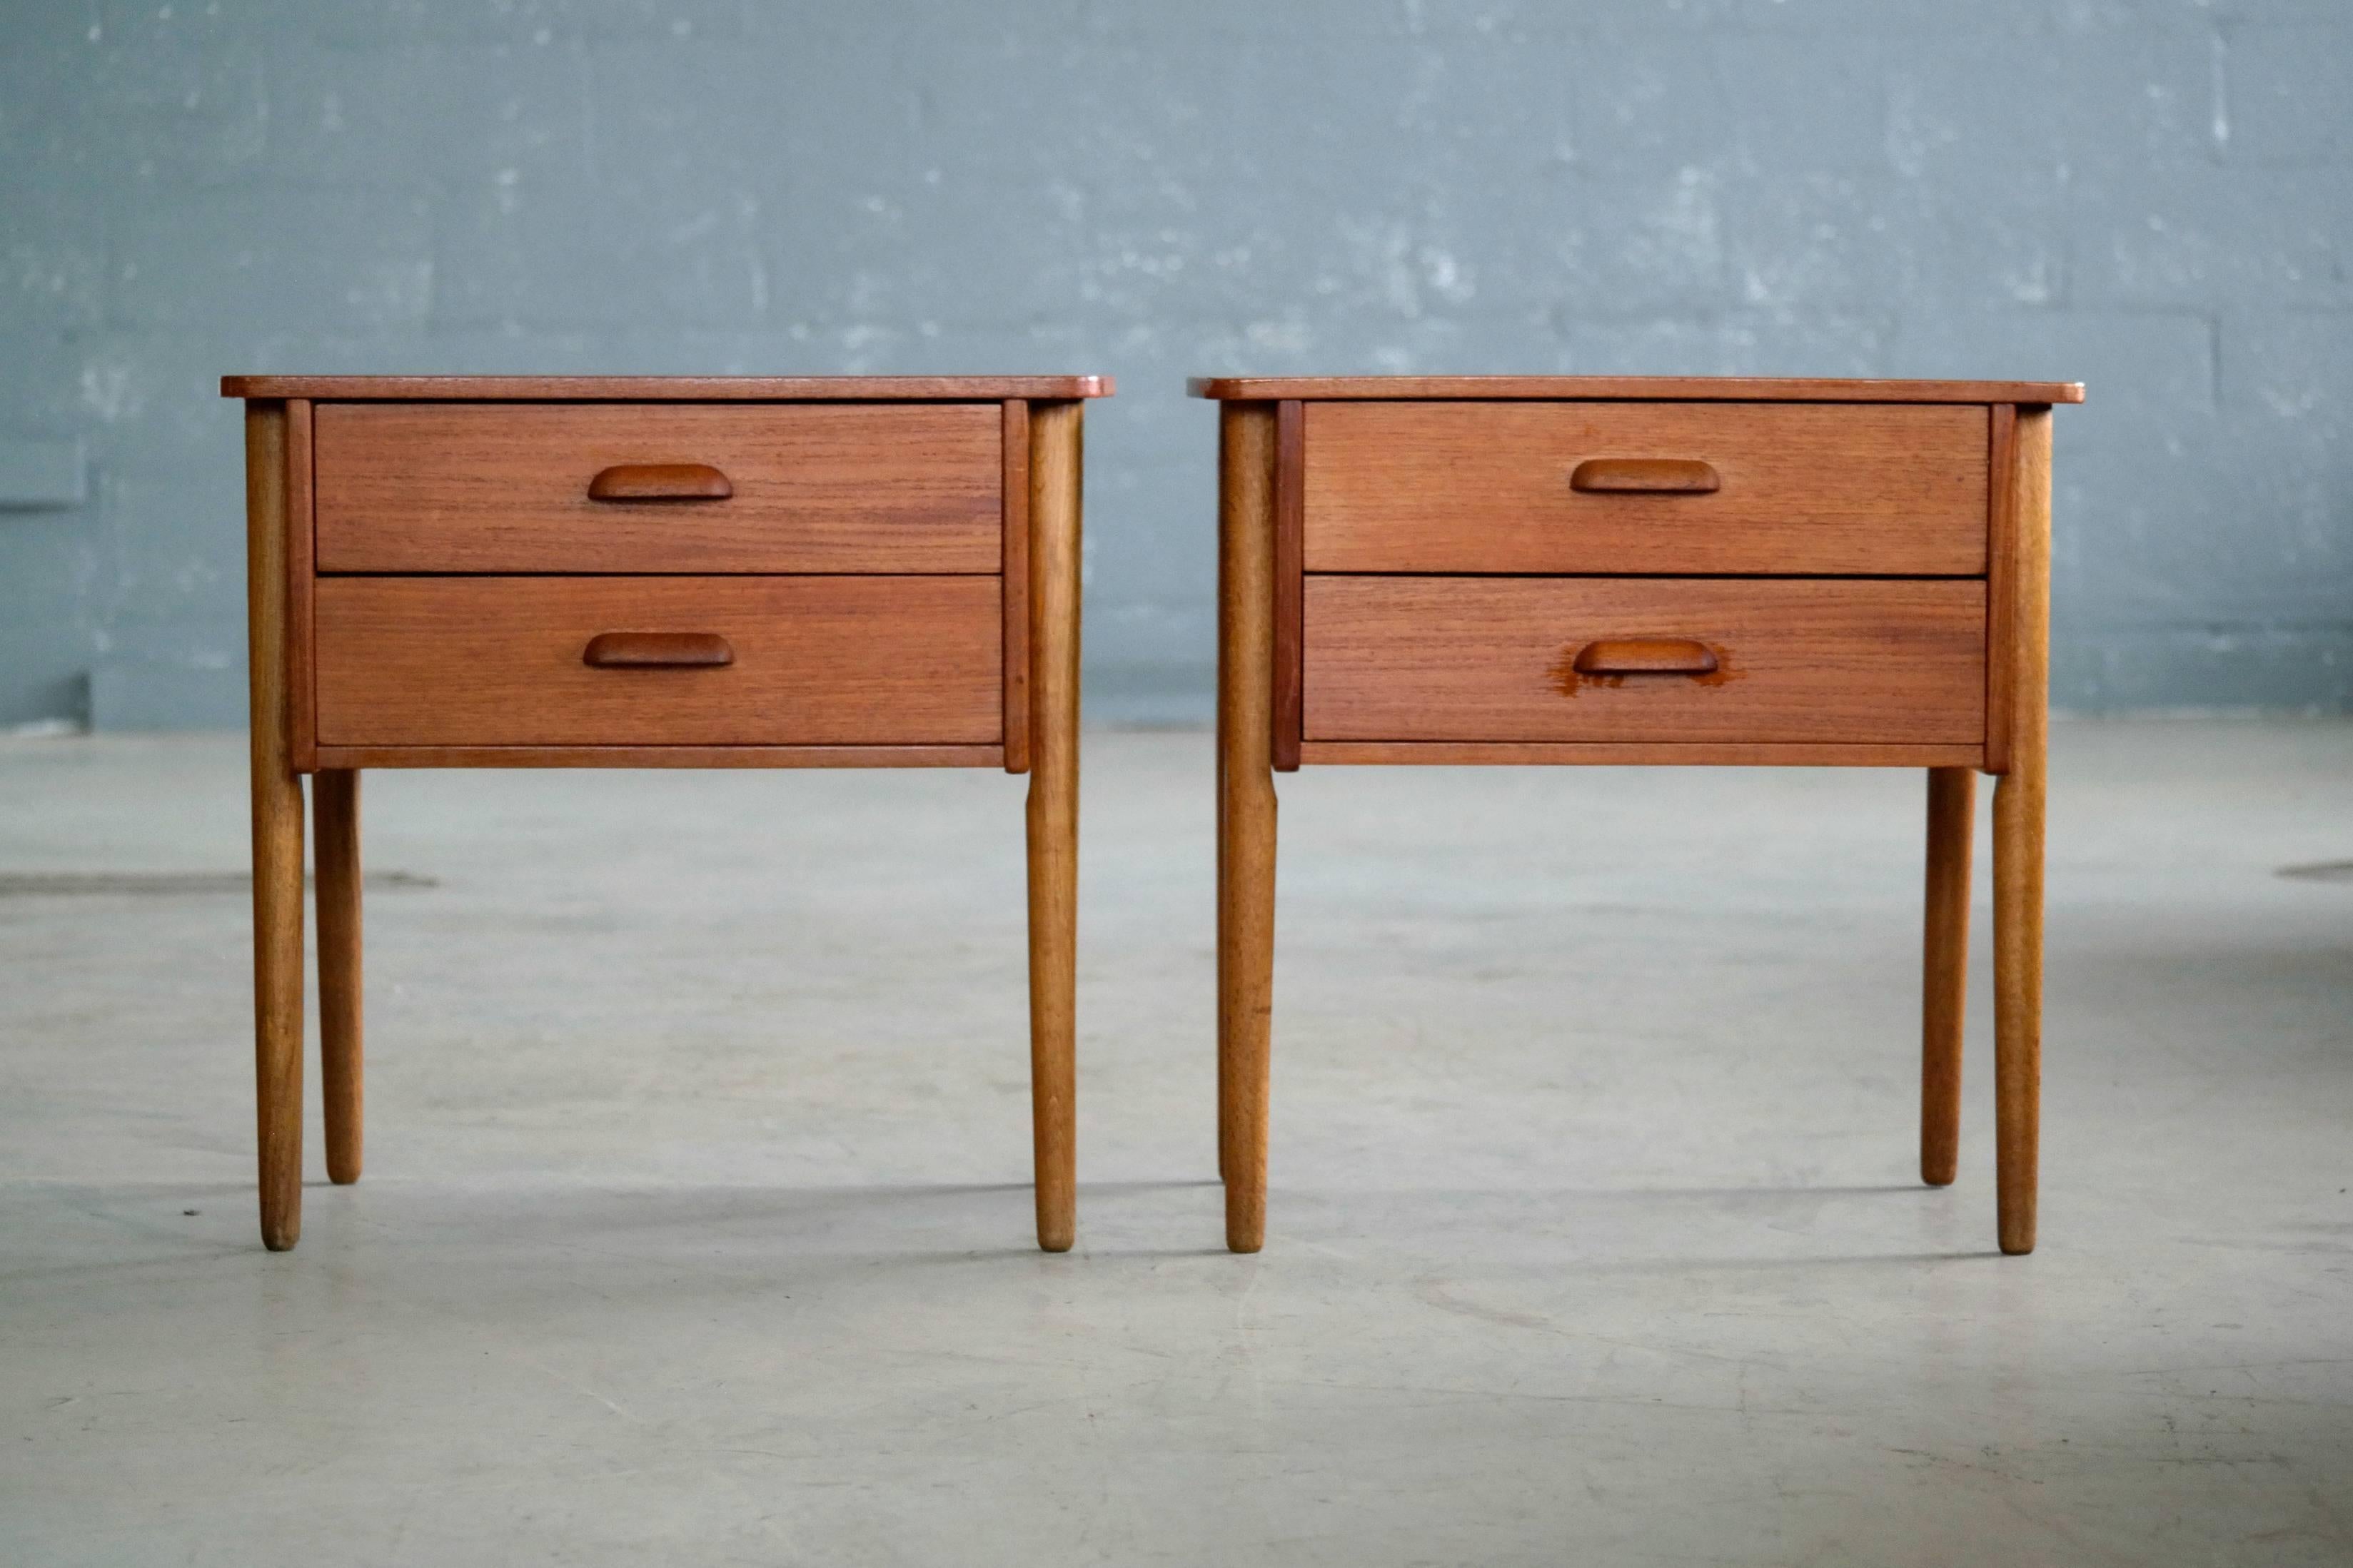 Elegant pair of nightstands made from teak veneer on legs of solid oak. Nice build quality all solid ply with nice dovetailing of drawers. Great grain and color with only minor age appropriate wear. Unmarked.